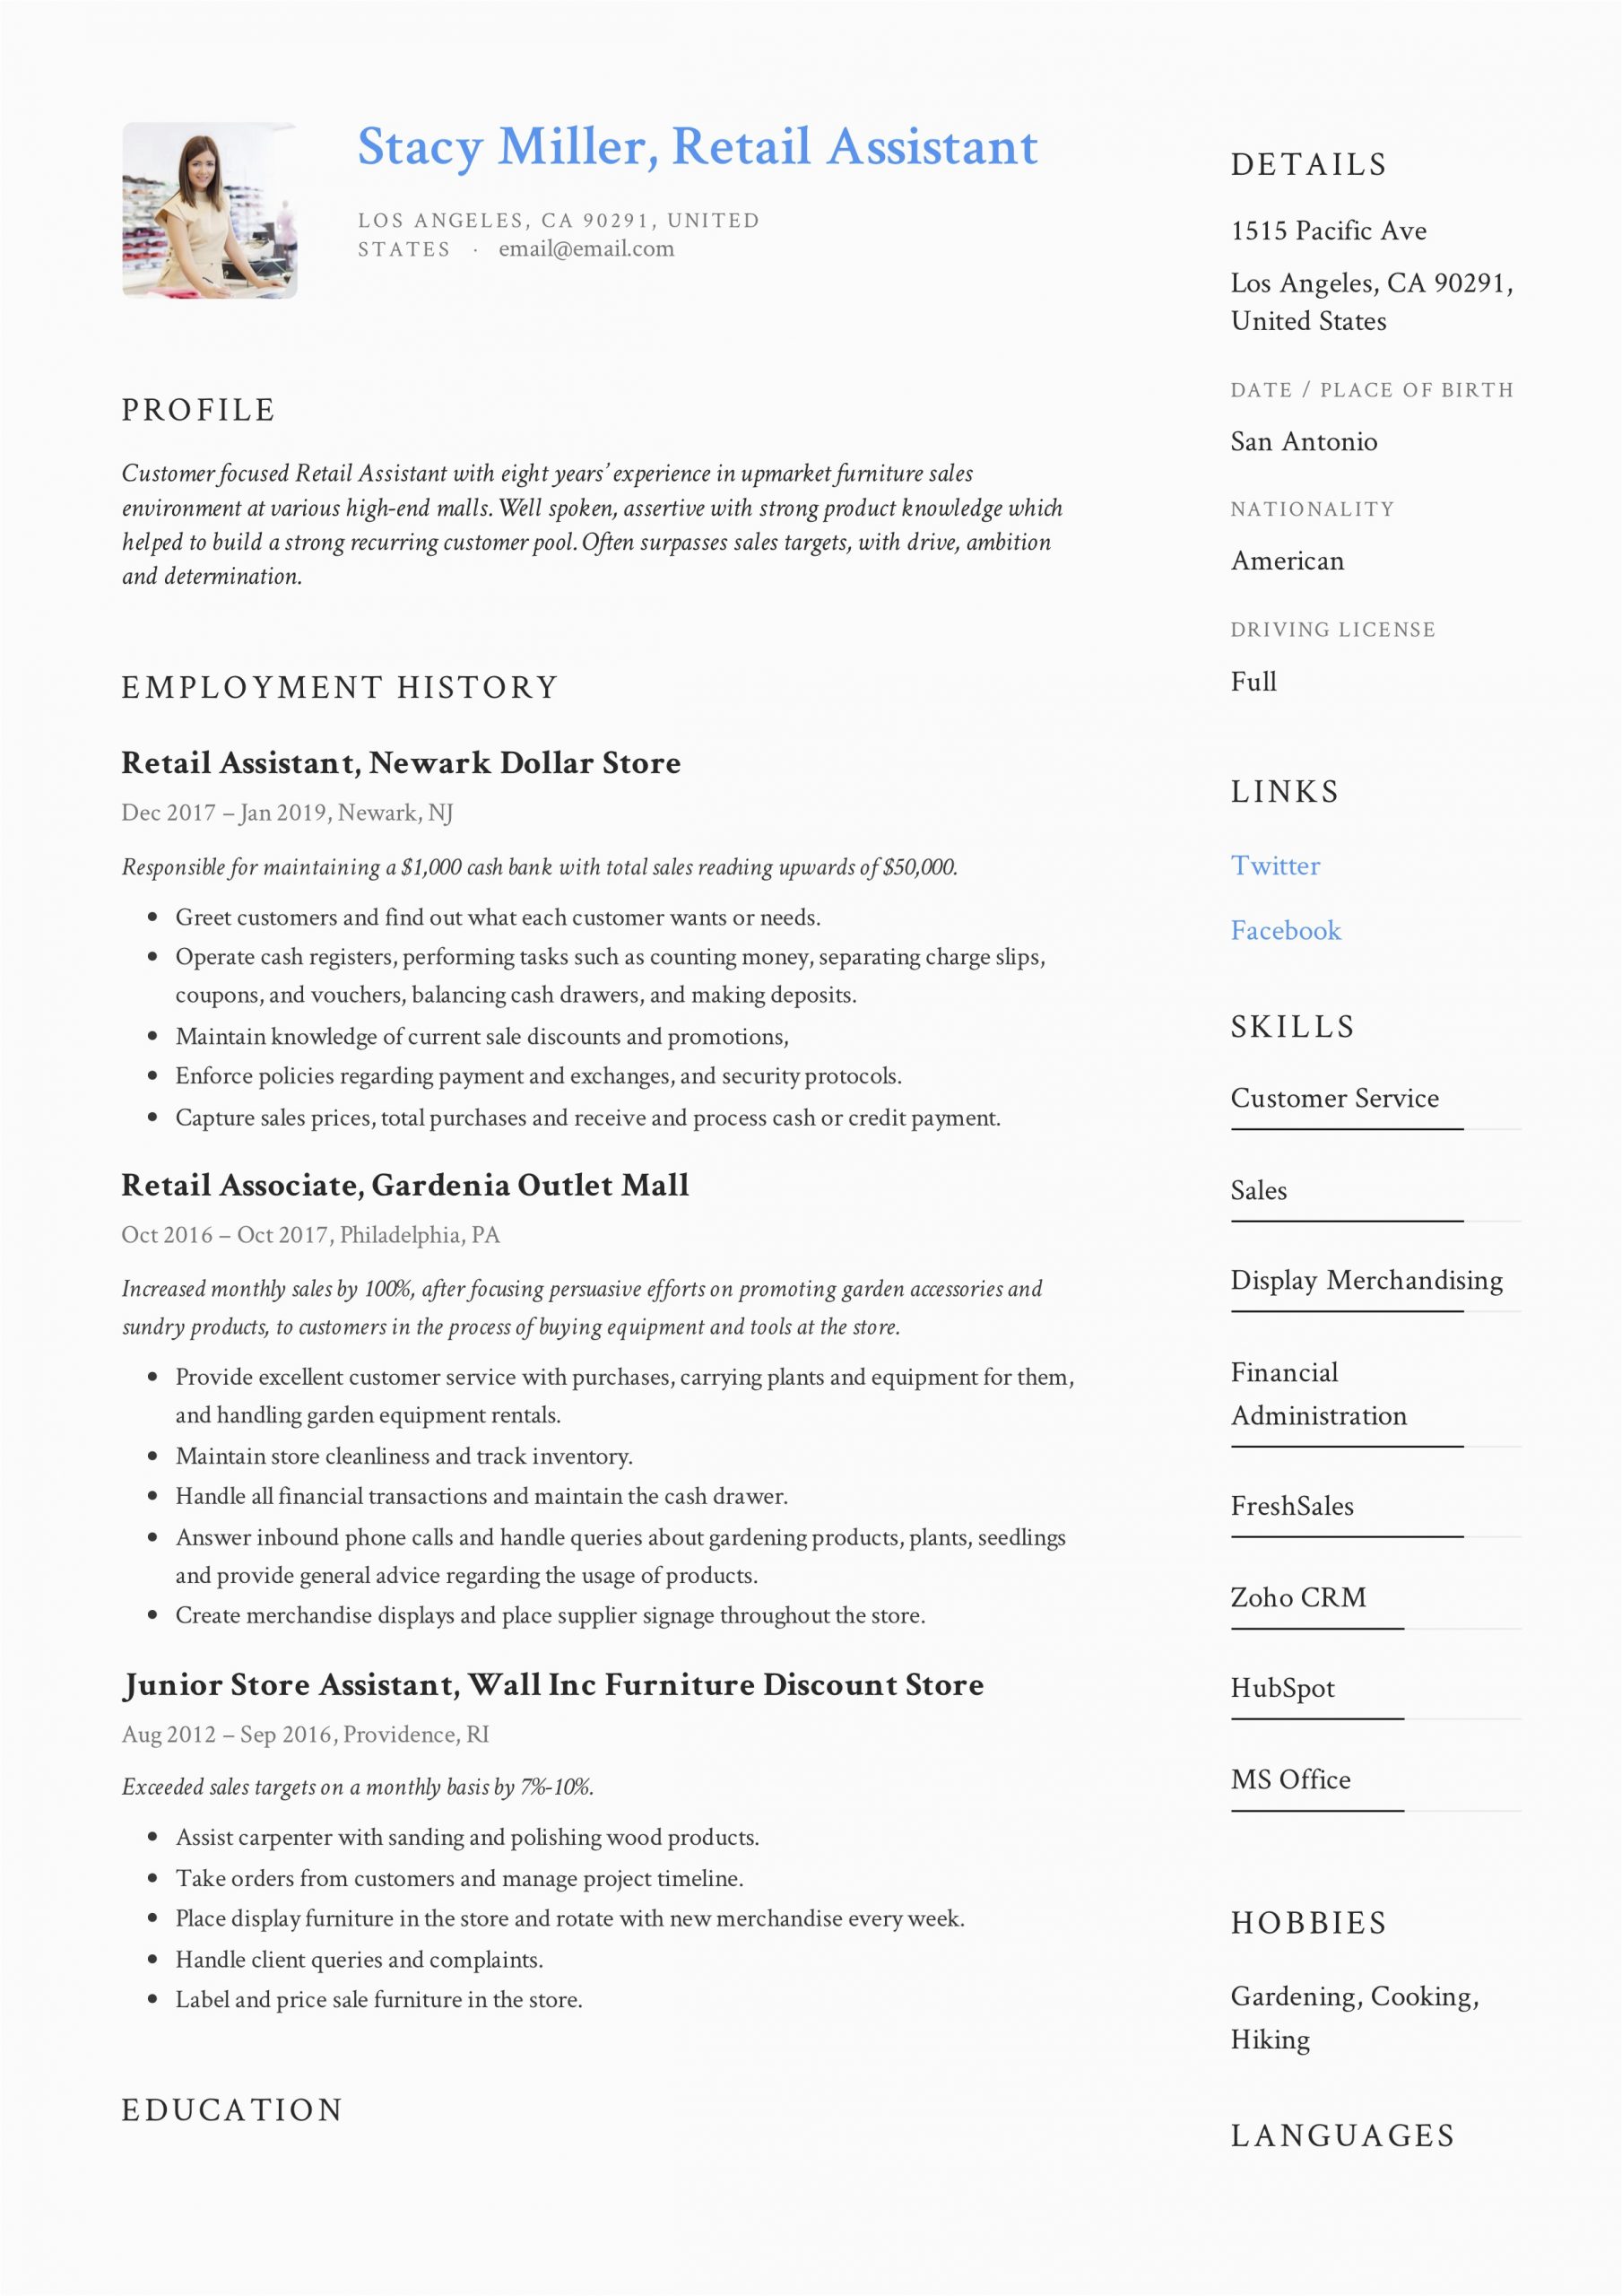 Sample Resume for Retail Sales Position 12 Retail assistant Resume Samples & Writing Guide